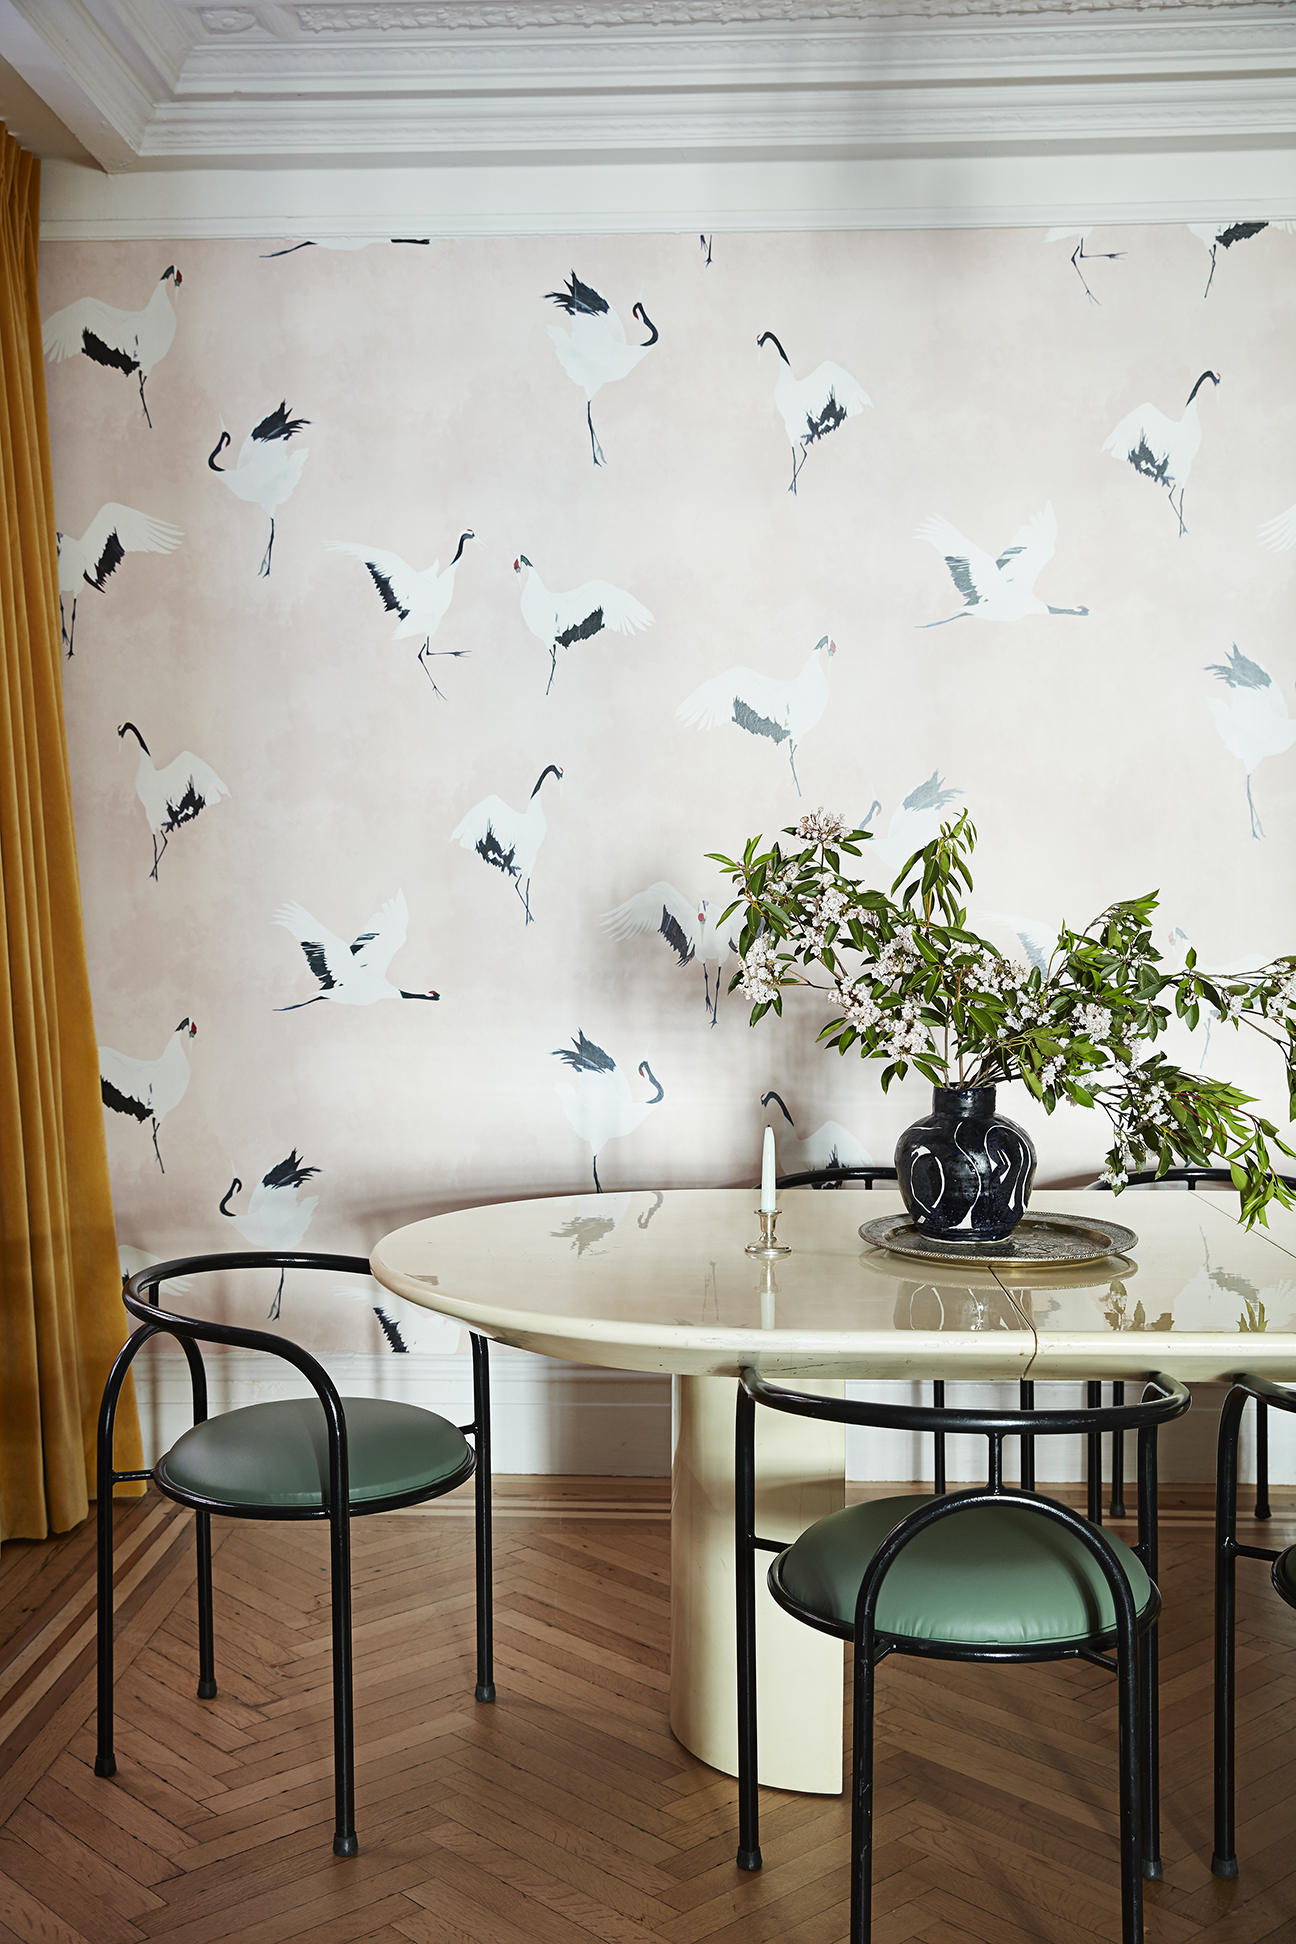 Hand-Painted Wallpaper Sets the Scene in This Dreamy Manhattan ...